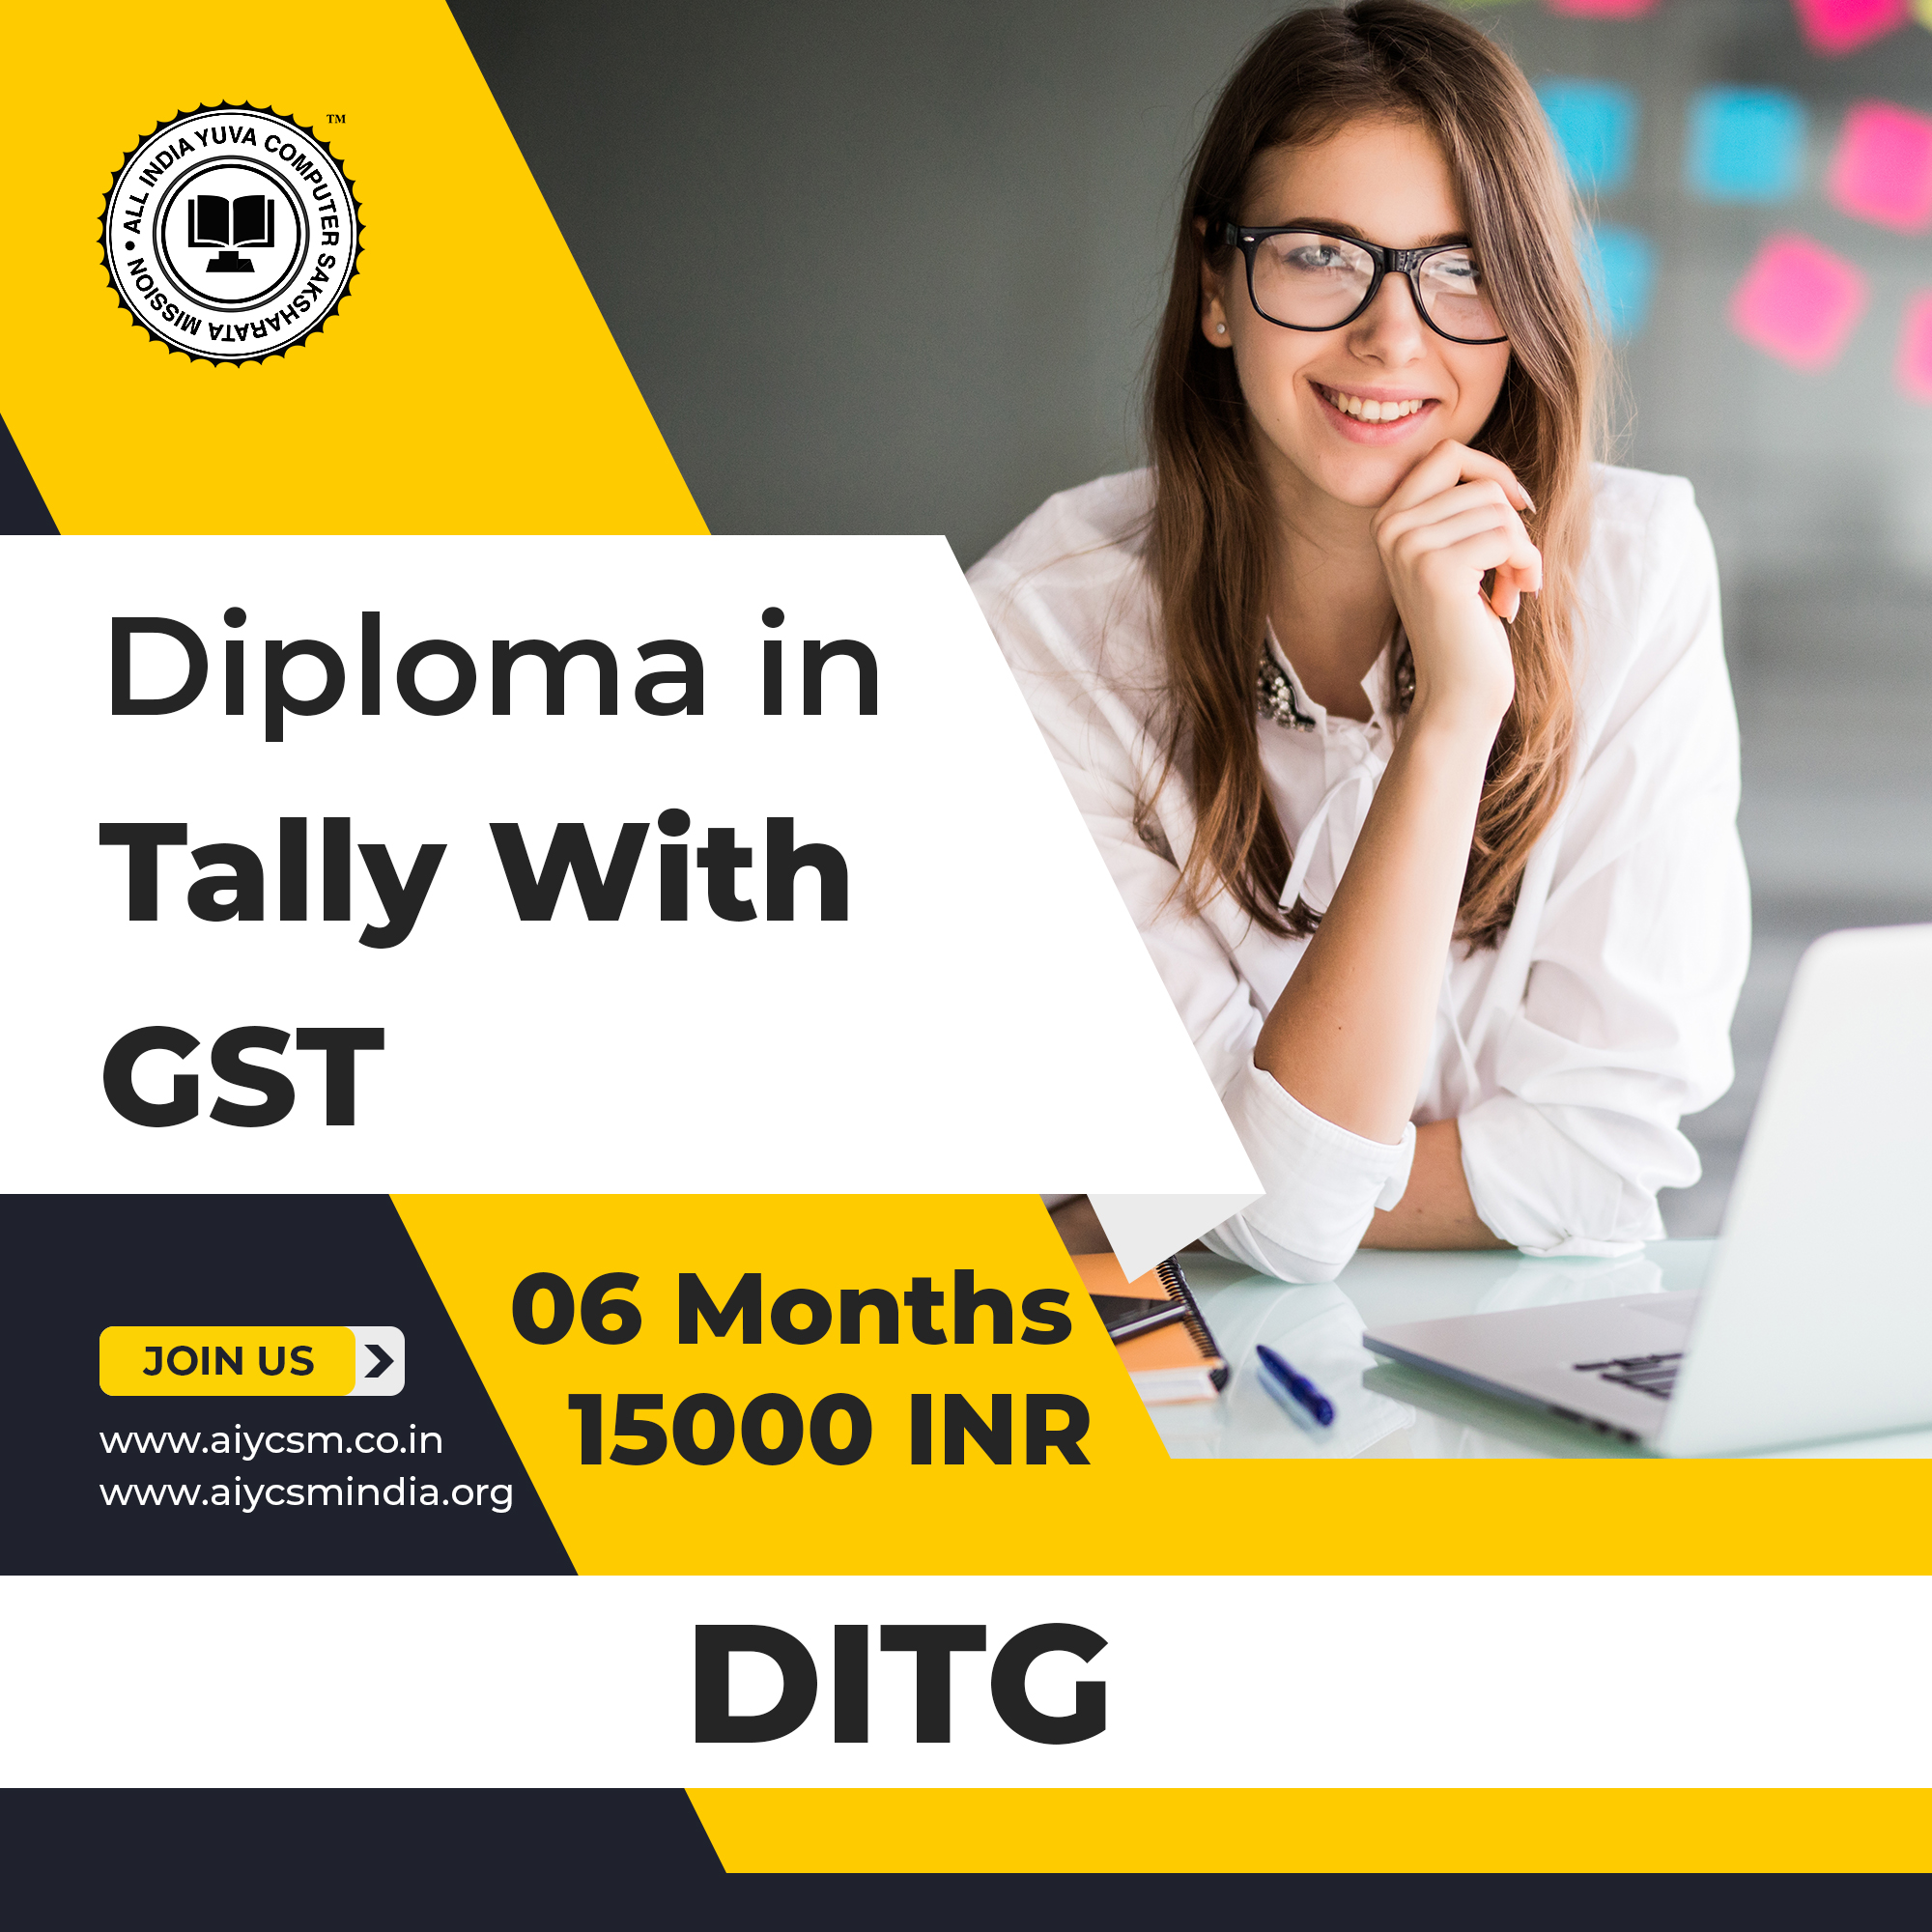 Diploma In Tally With GST